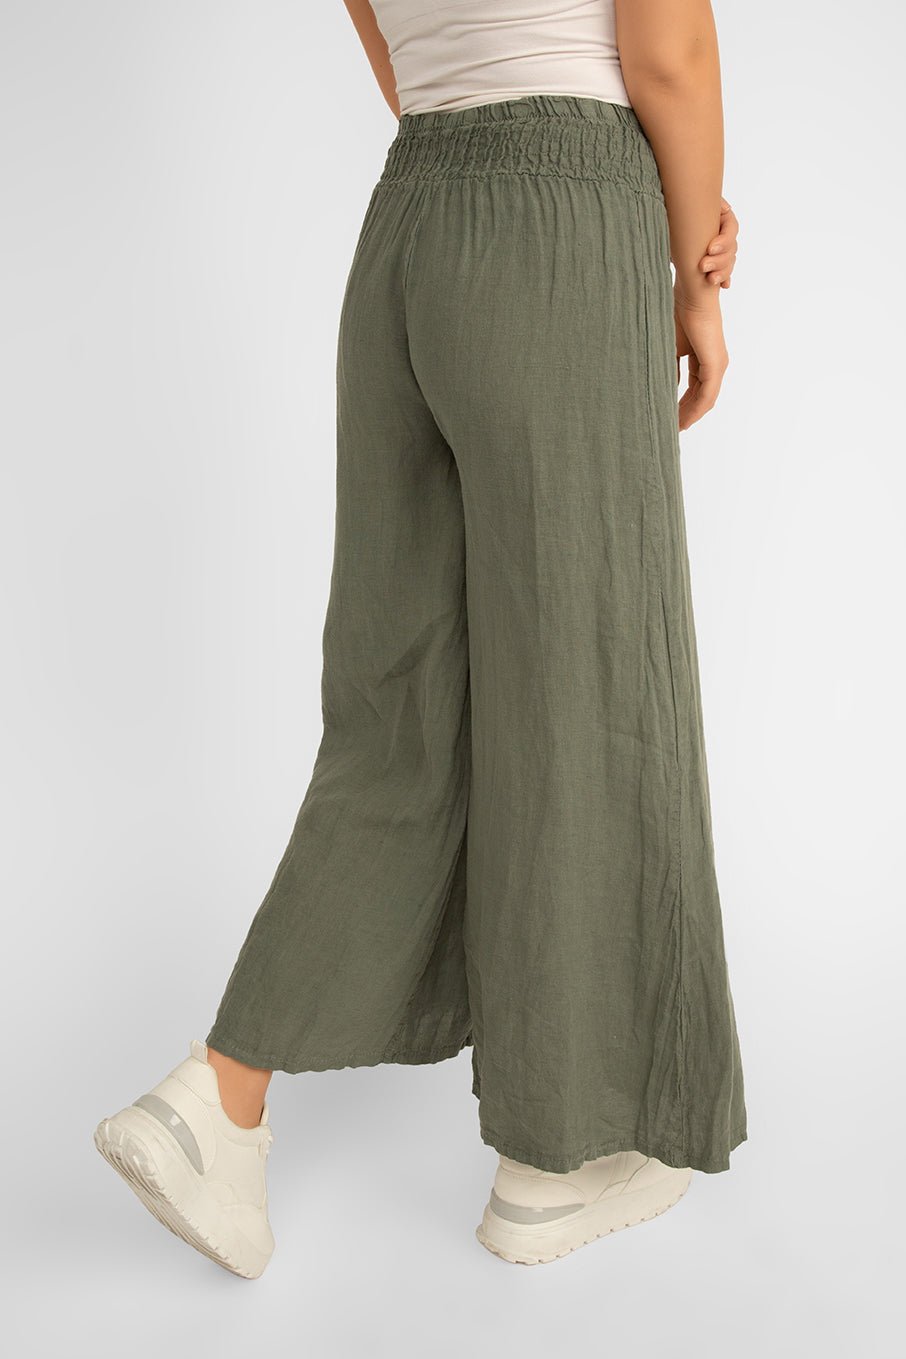 Back view of Me & Gee (19-801) Women's Pull-on Wide Leg Smocked Waist Linen Pants in Military Green